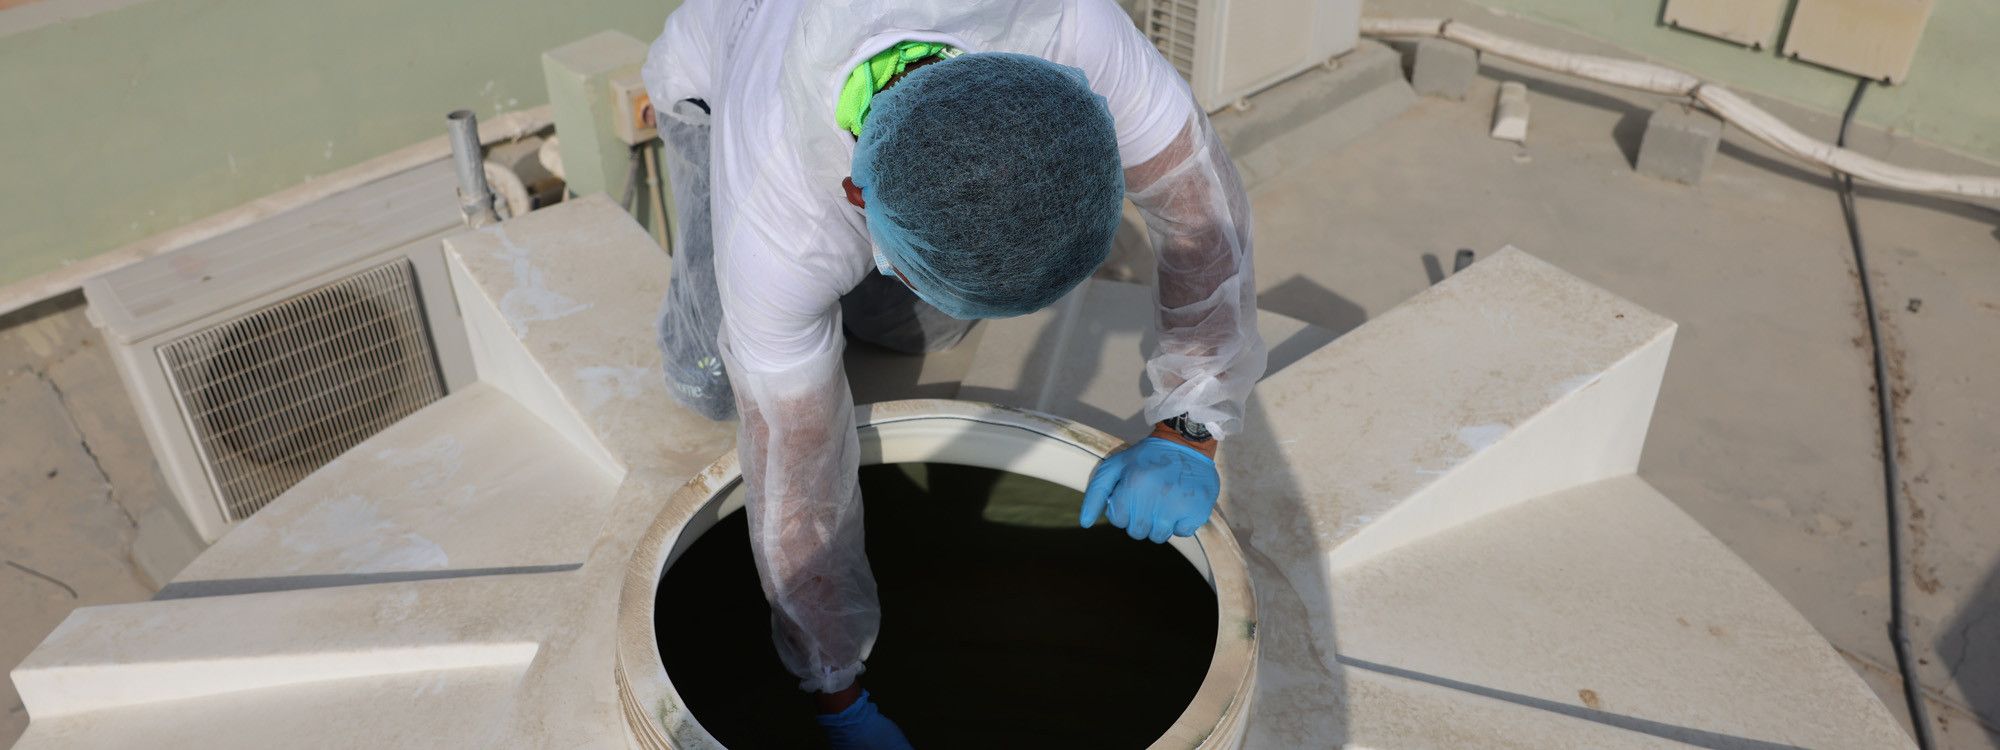 water tank cleaning services, clean water tank, disinfection of water